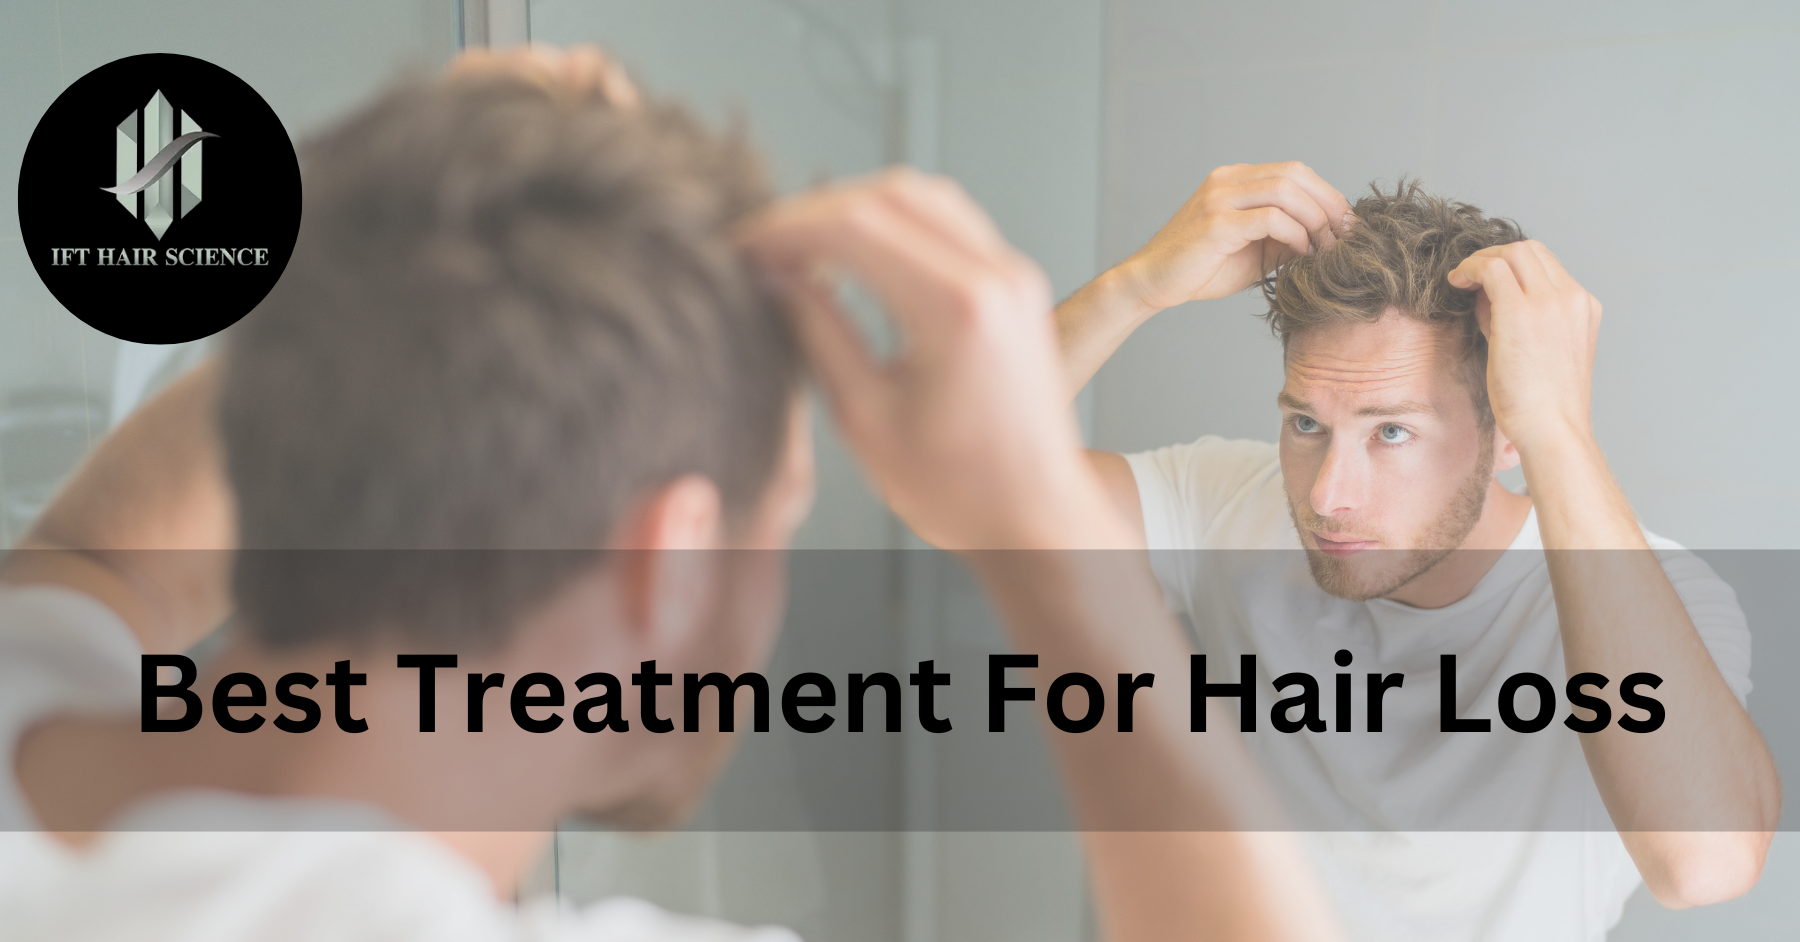 What is the best treatment for hair loss in men?